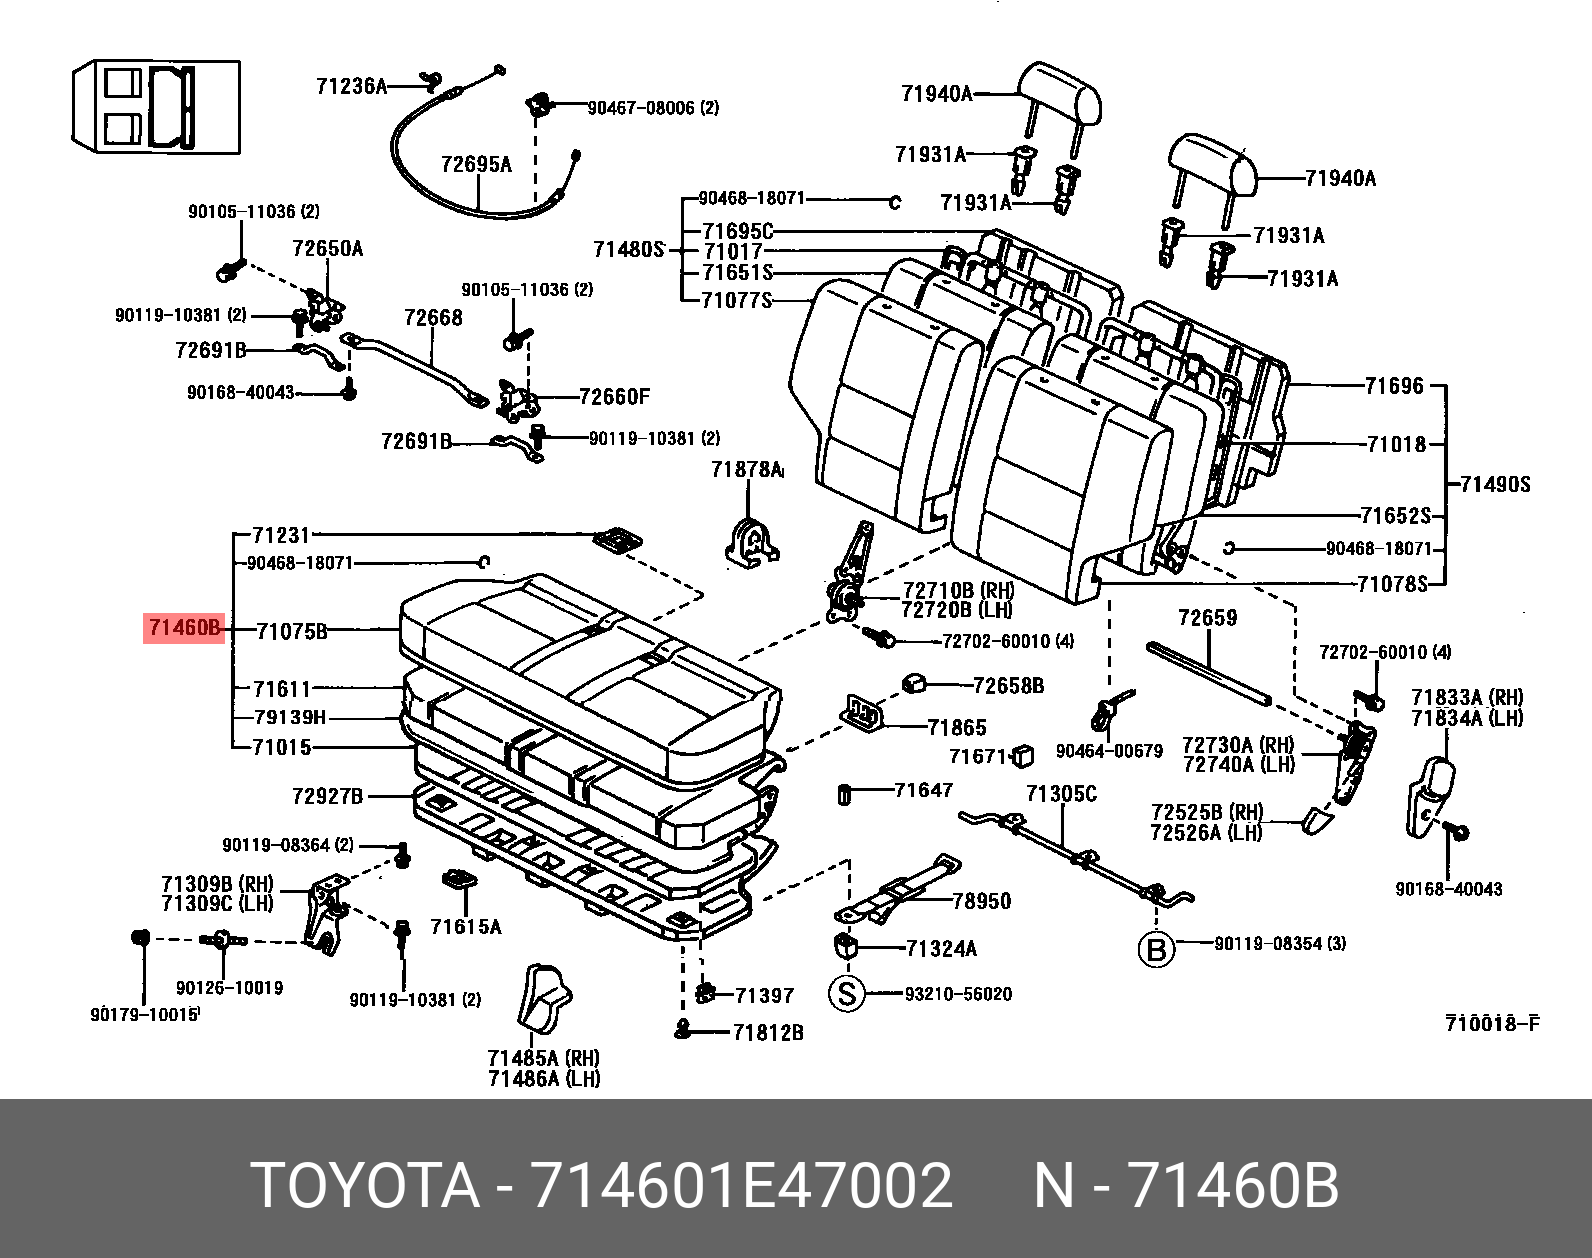 COROLLA 198705 - 199205, CUSHION ASSY, REAR SEAT (FOR BENCH TYPE)